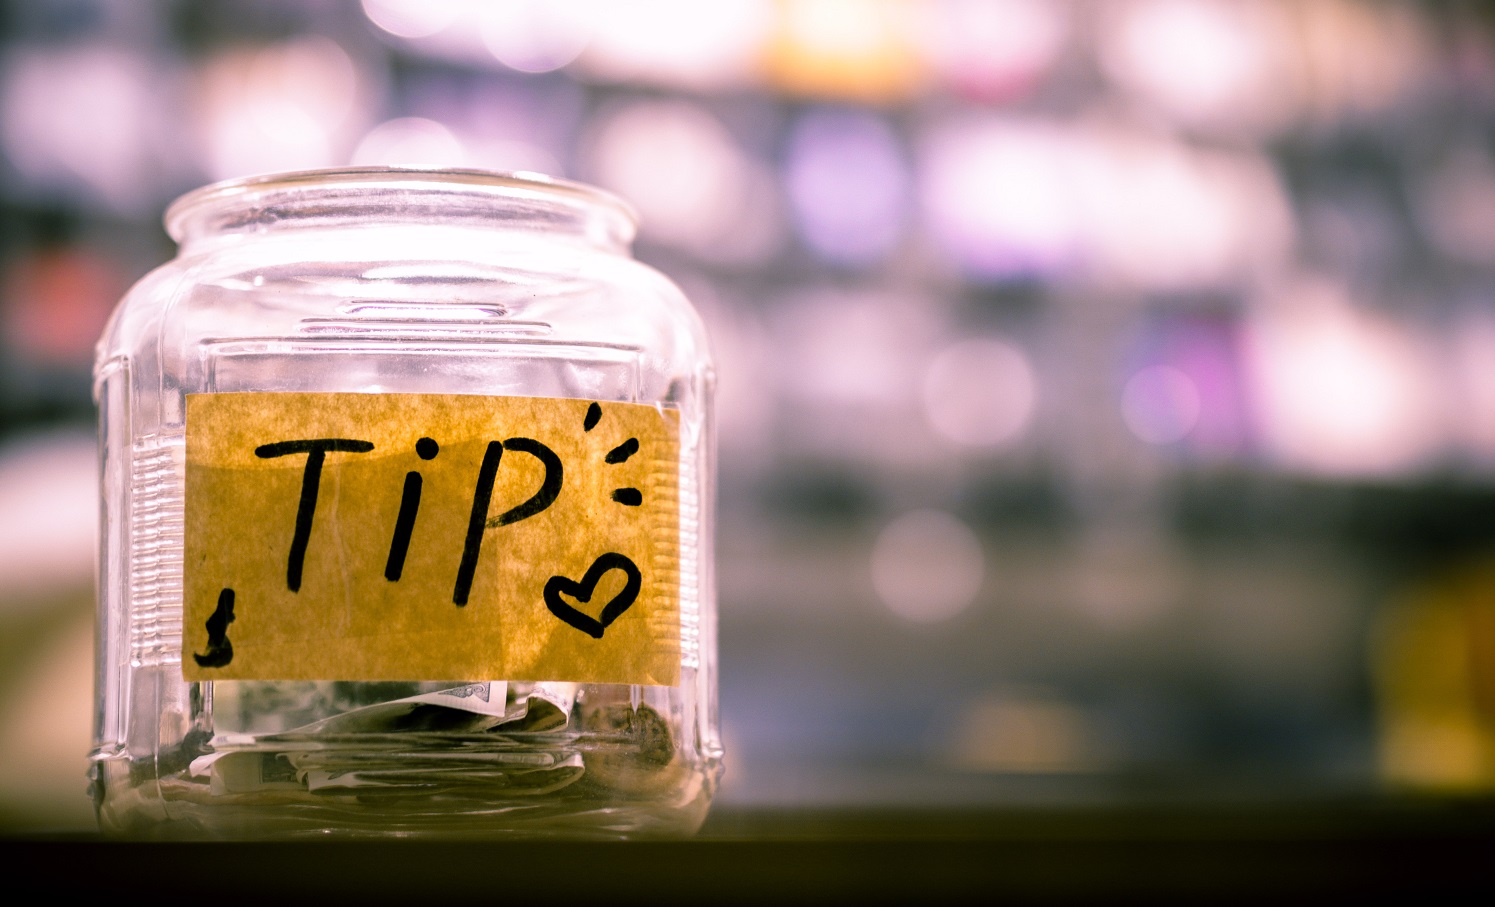 Twitter’s Tipping Feature “Tips” Now Available to Everyone